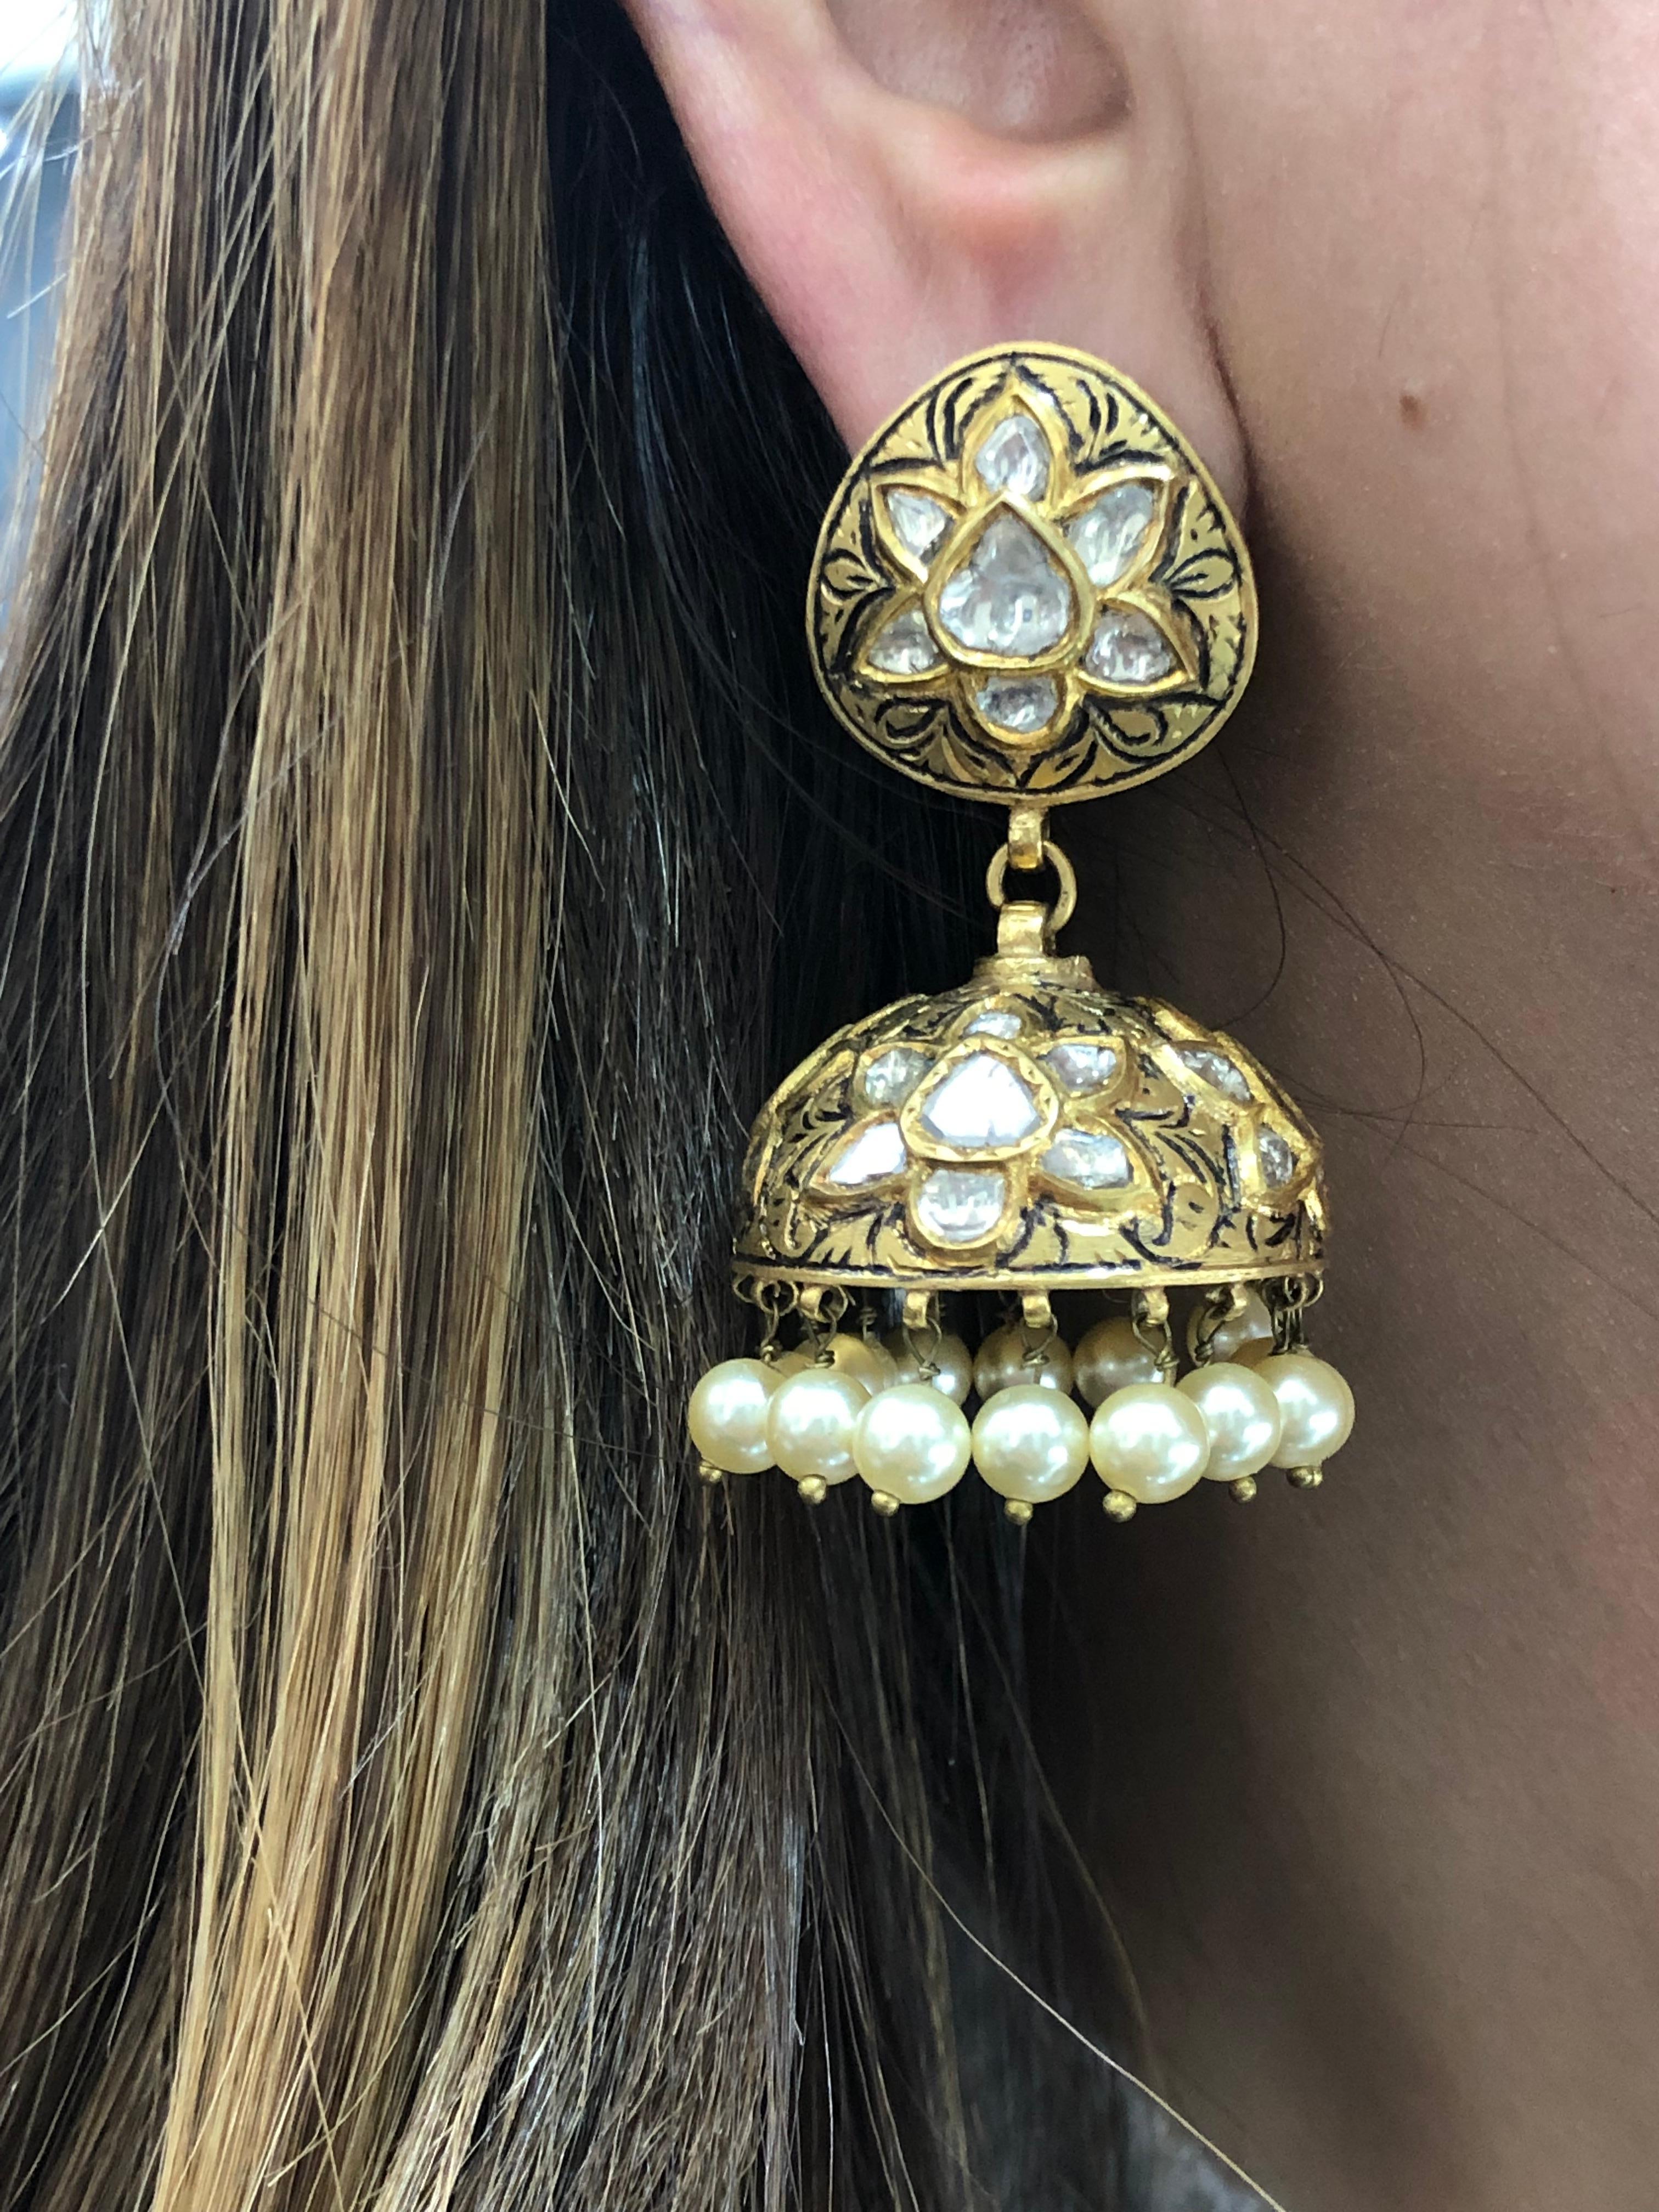 Uncut Diamonds - 6.80 Carat
18kt Gold - 27.000 grams
Ref No - KPT-DA

A beautiful pair of antique look hand crafted earrings, epic in its beauty profound in its meaning for the royal you.
